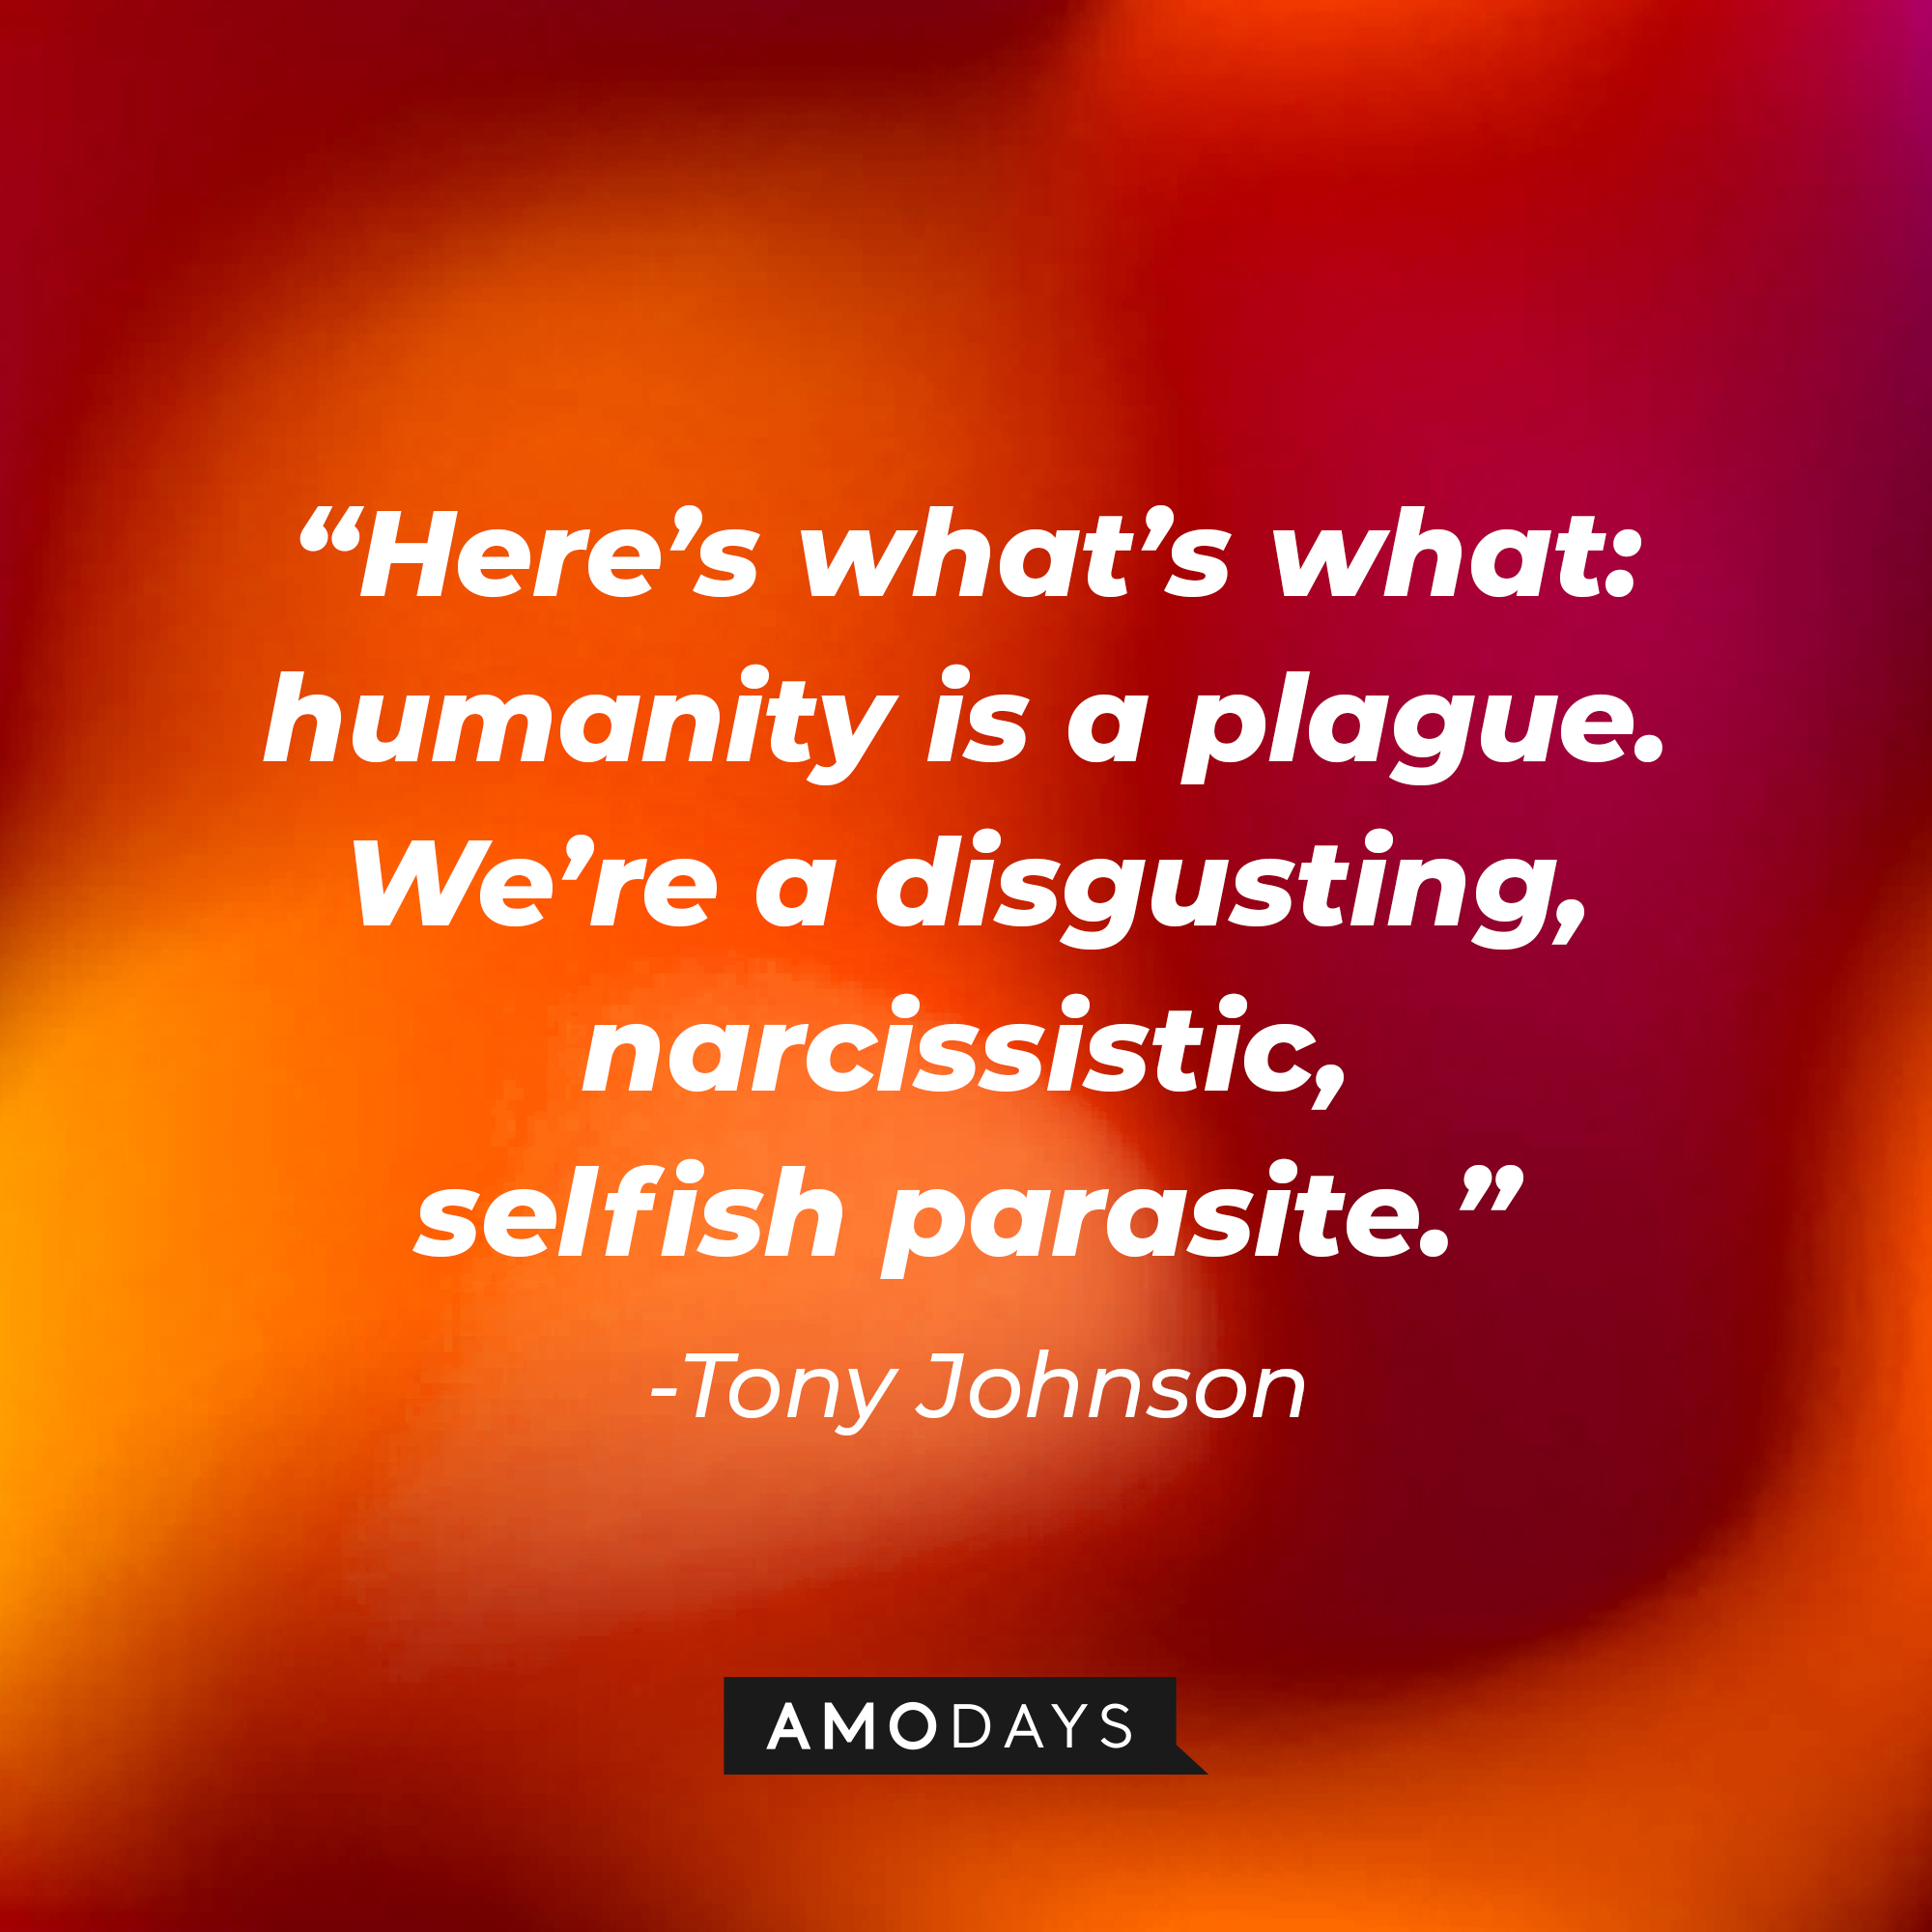 Tony Johnson’s quote: “Here’s what’s what: humanity is a plague. We’re a disgusting, narcissistic, selfish parasite.”  |  Source: AmoDays